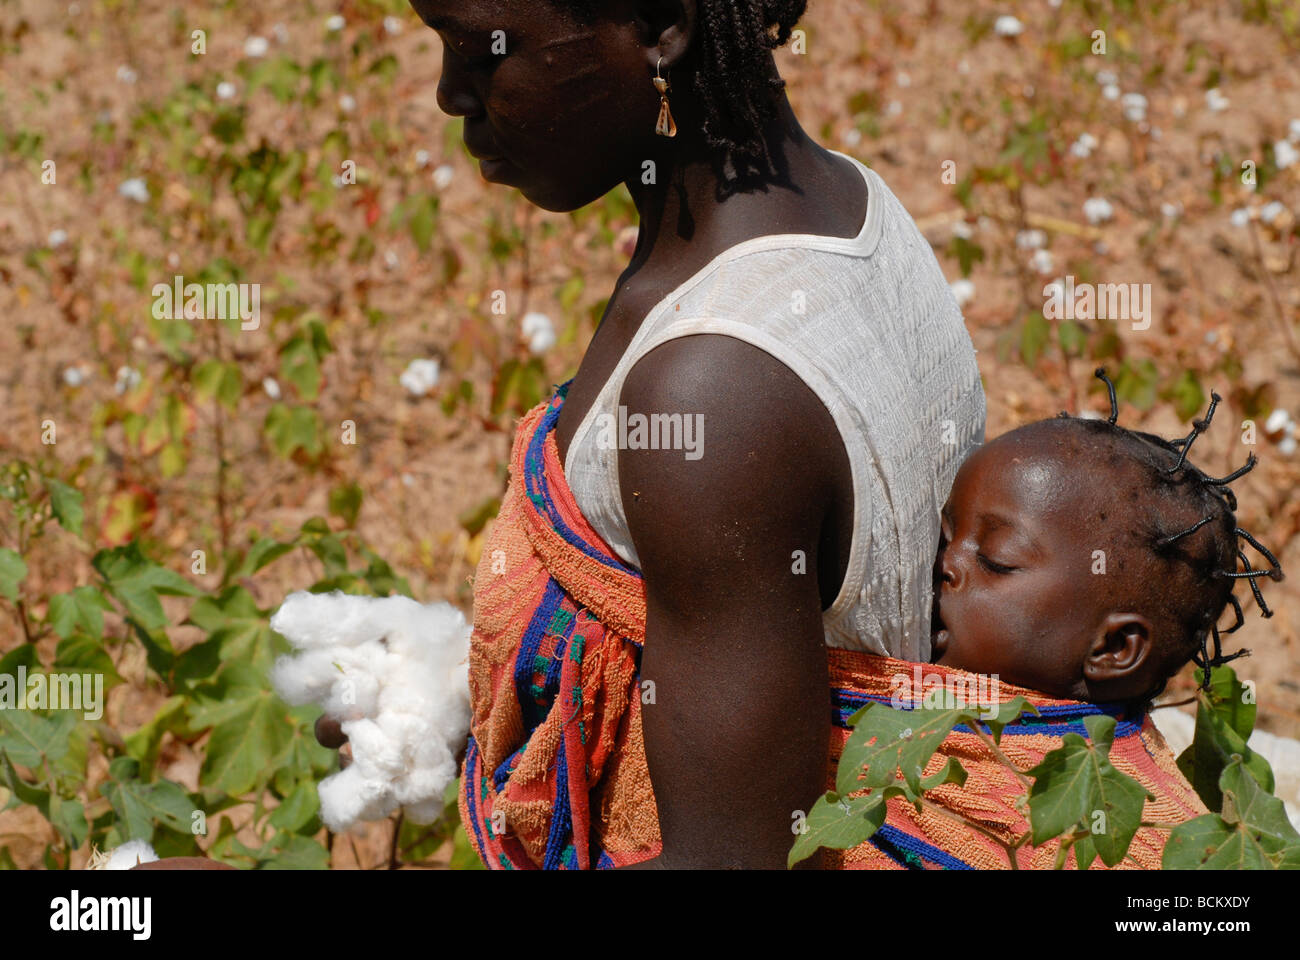 West Africa Burkina Faso , fairtrade and organic cotton project , woman with baby harvest cotton at farm Stock Photo